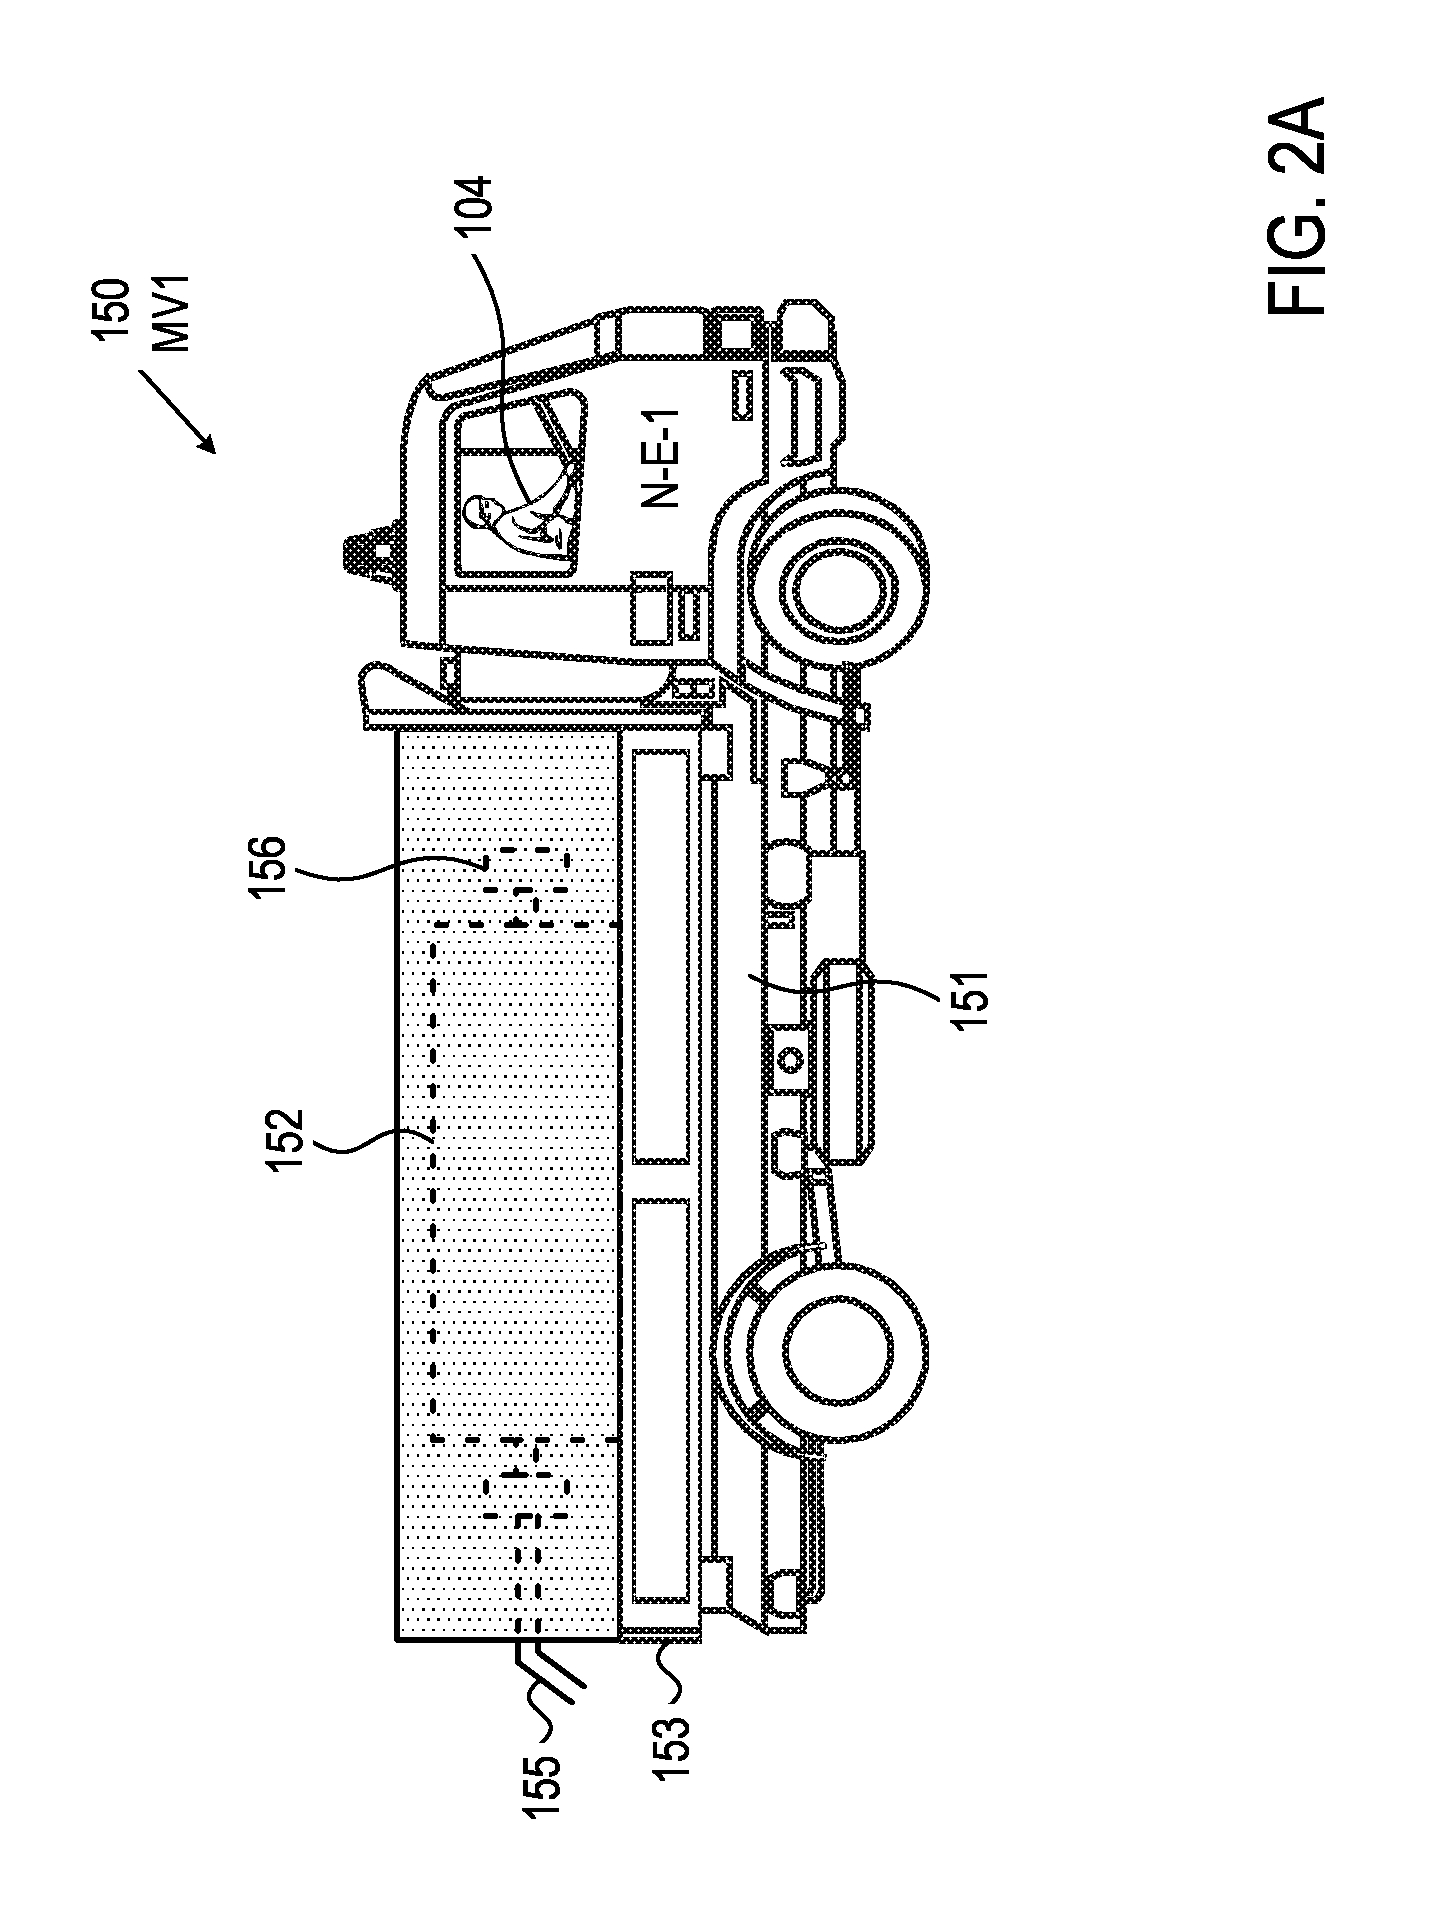 Payment system and method for provision of power to electric vehicle batteries